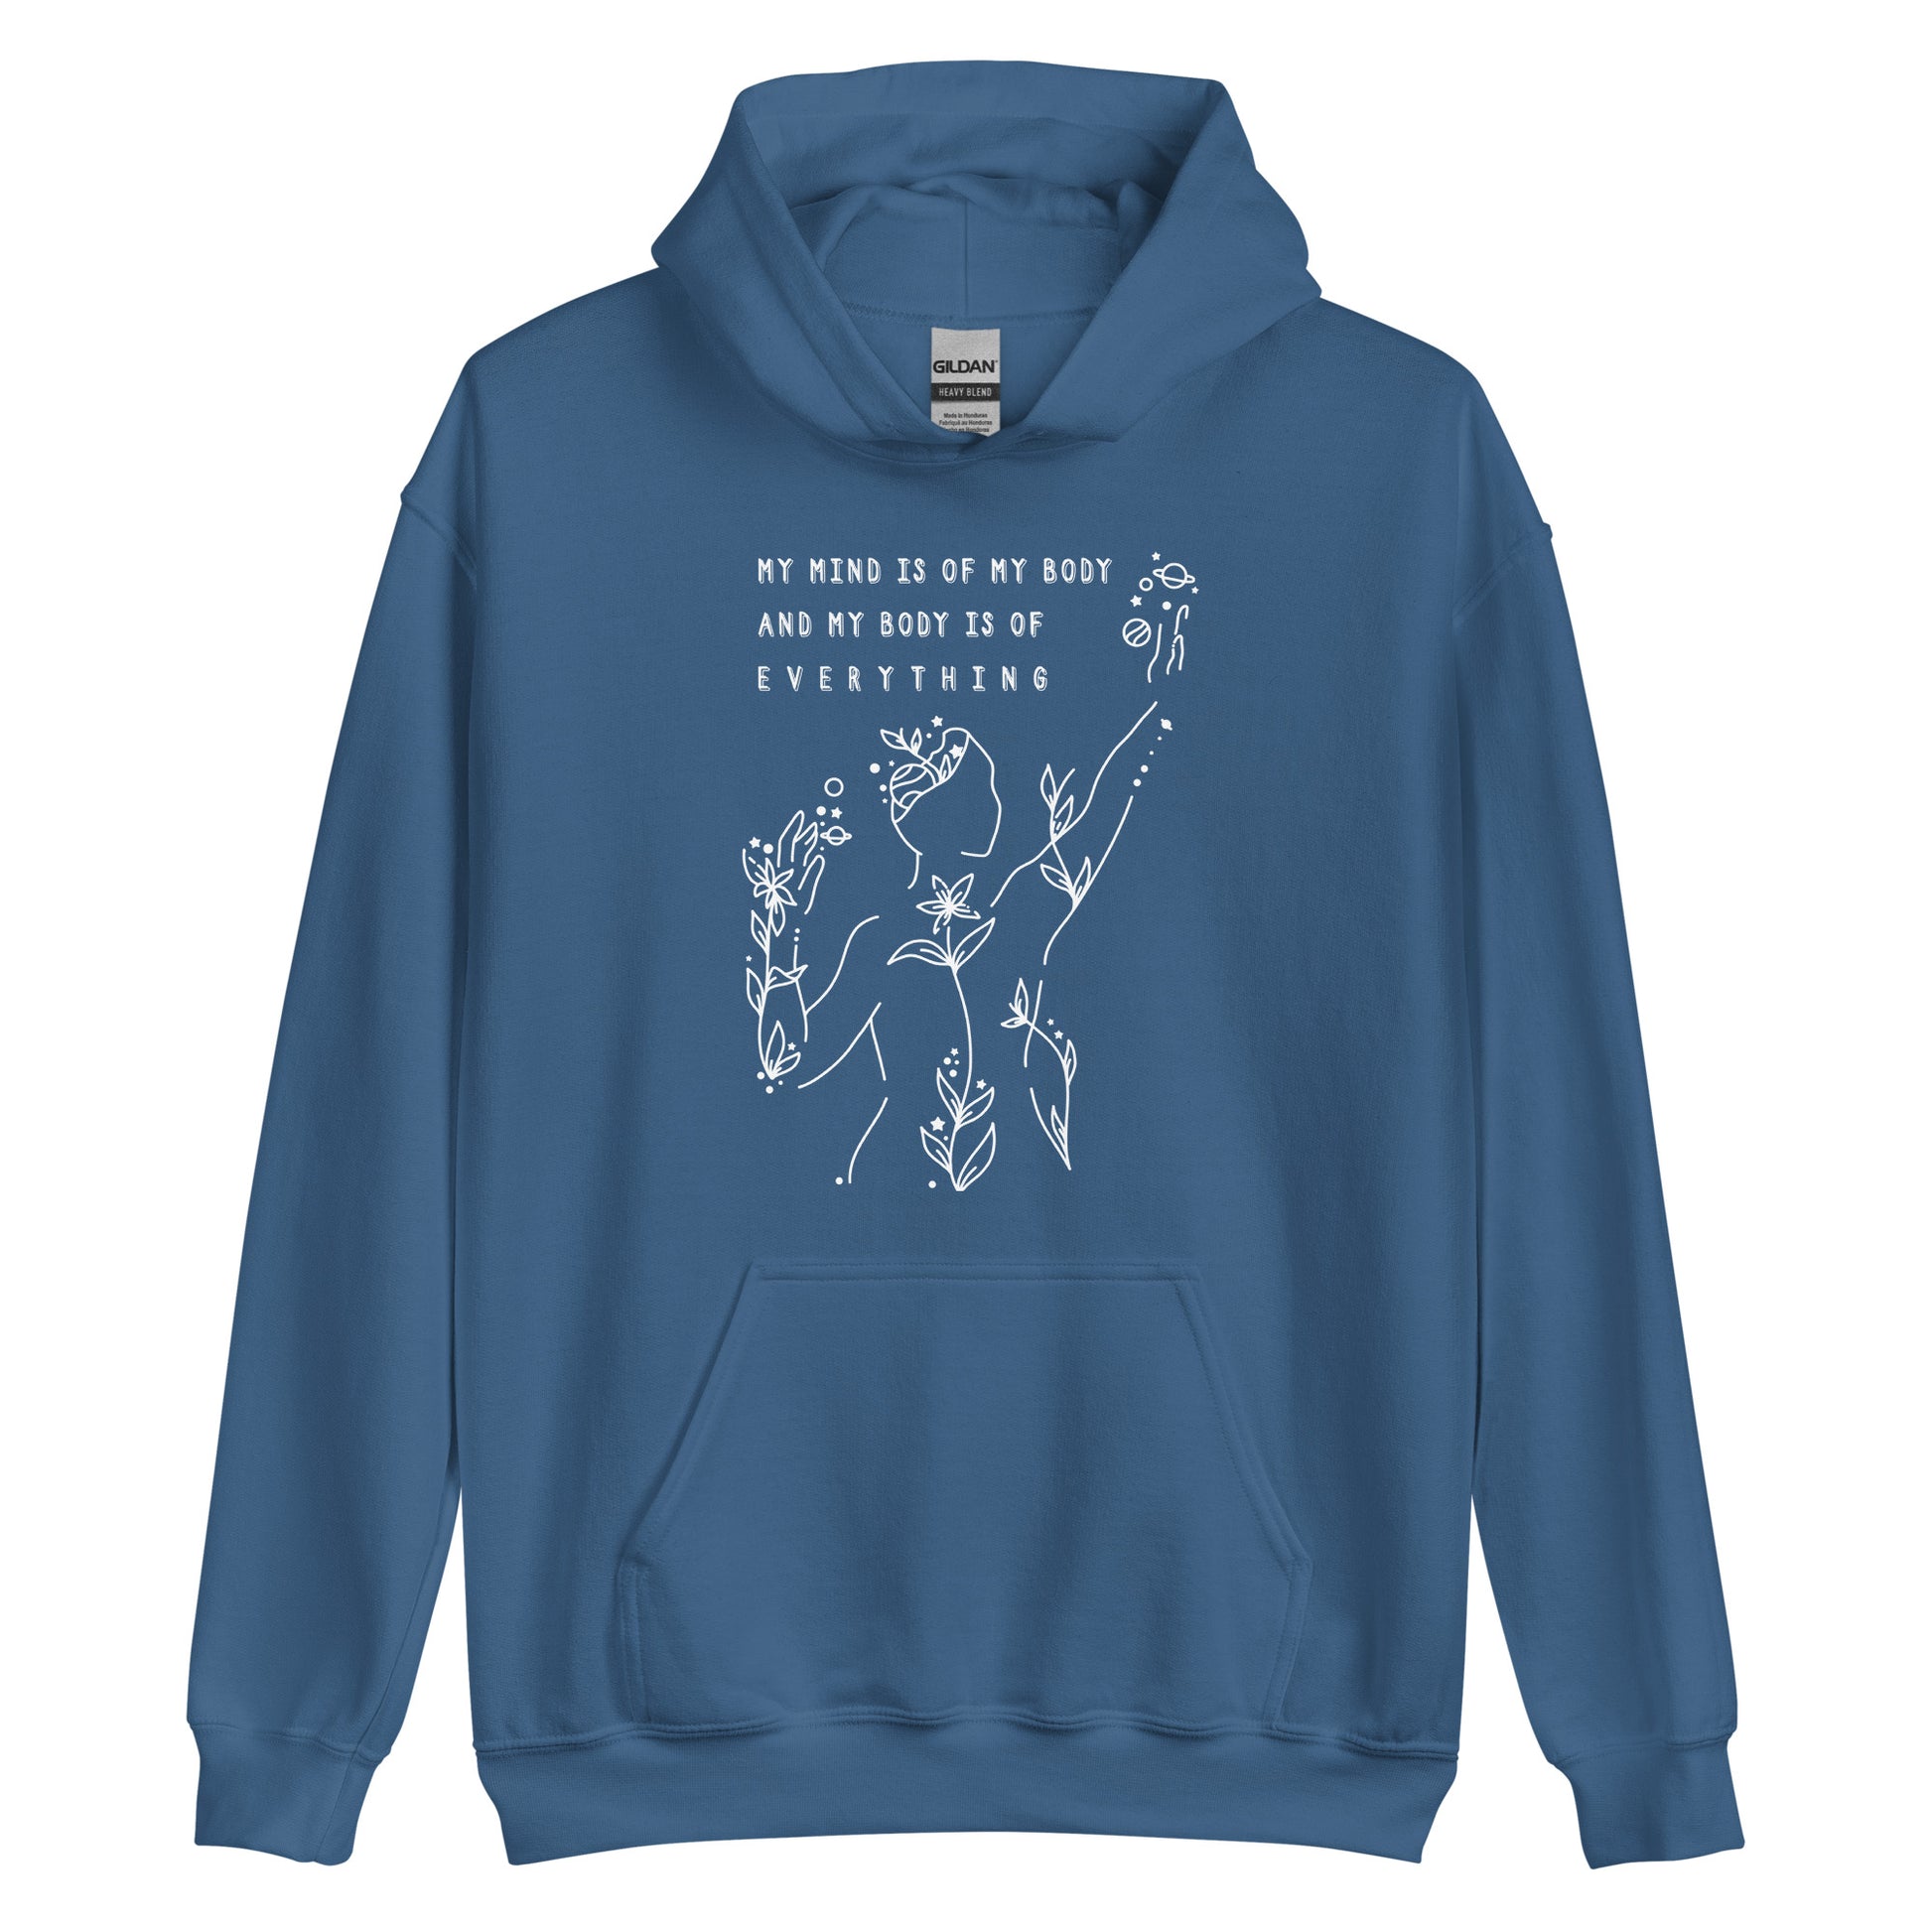 A blue hooded sweatshirt featuring an abstract illustration of a figure whose body is spreading out into plants and planets and stars. Text above the figure reads "My mind is of my body and my body is of everything."